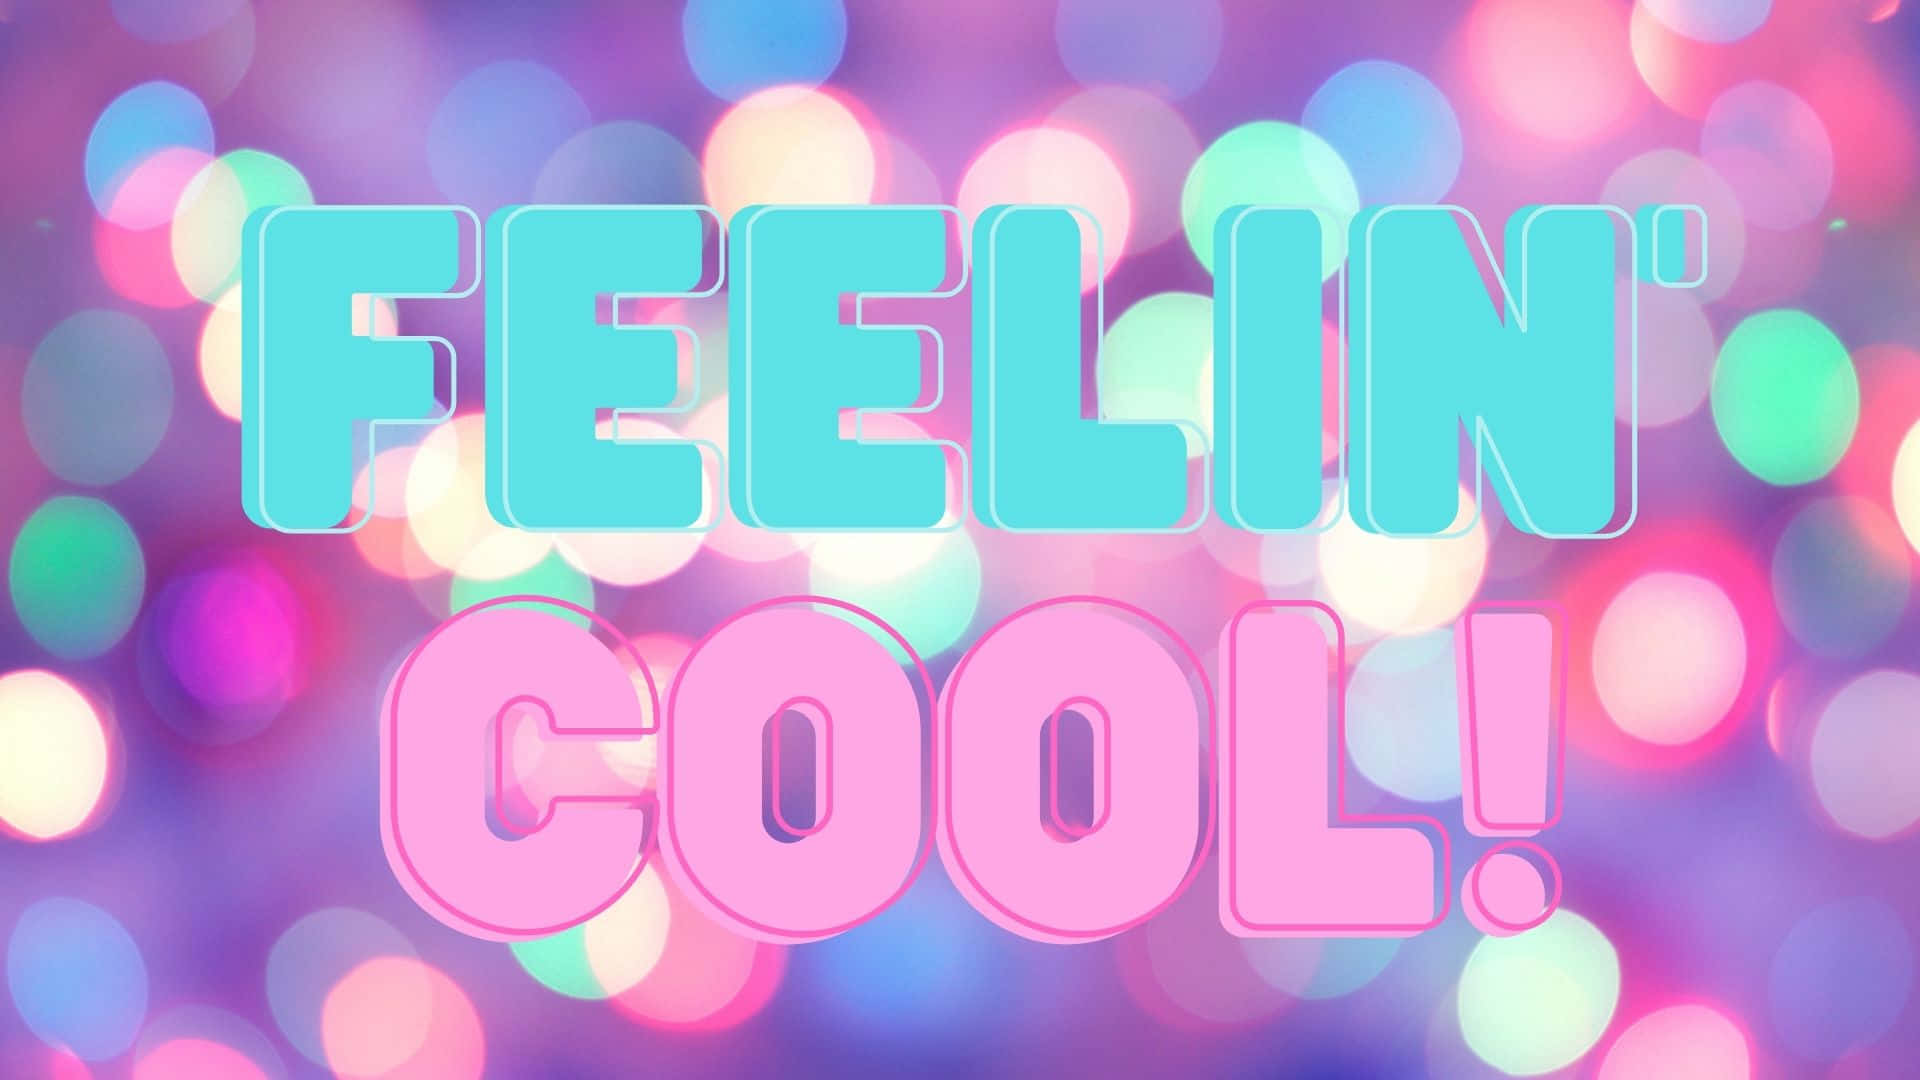 A Colorful Background With The Words Feelin'cool